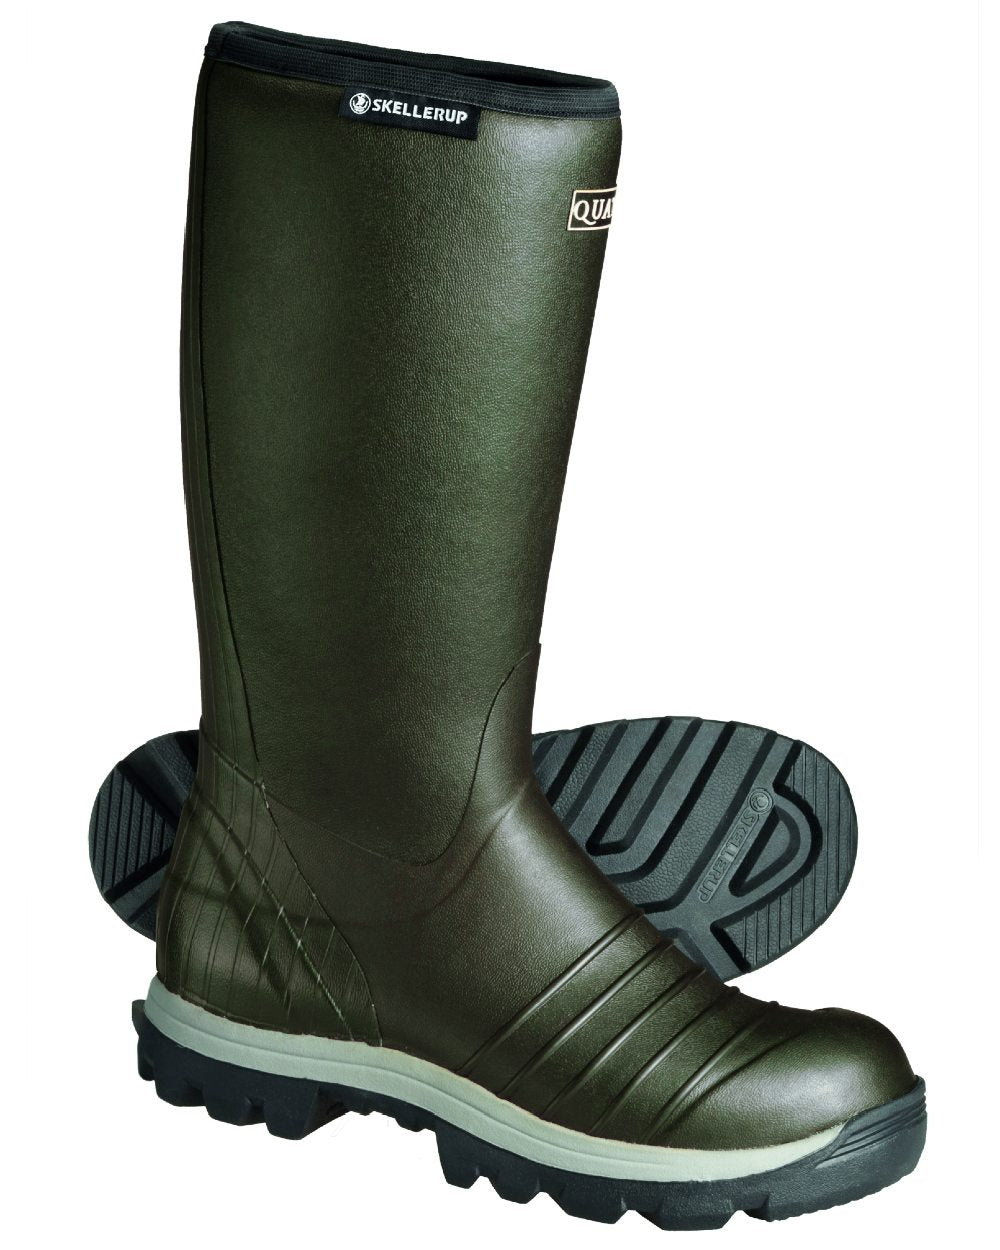 Green/Grey Coloured Skellerup Quatro Insulated Green Boot On A White Background